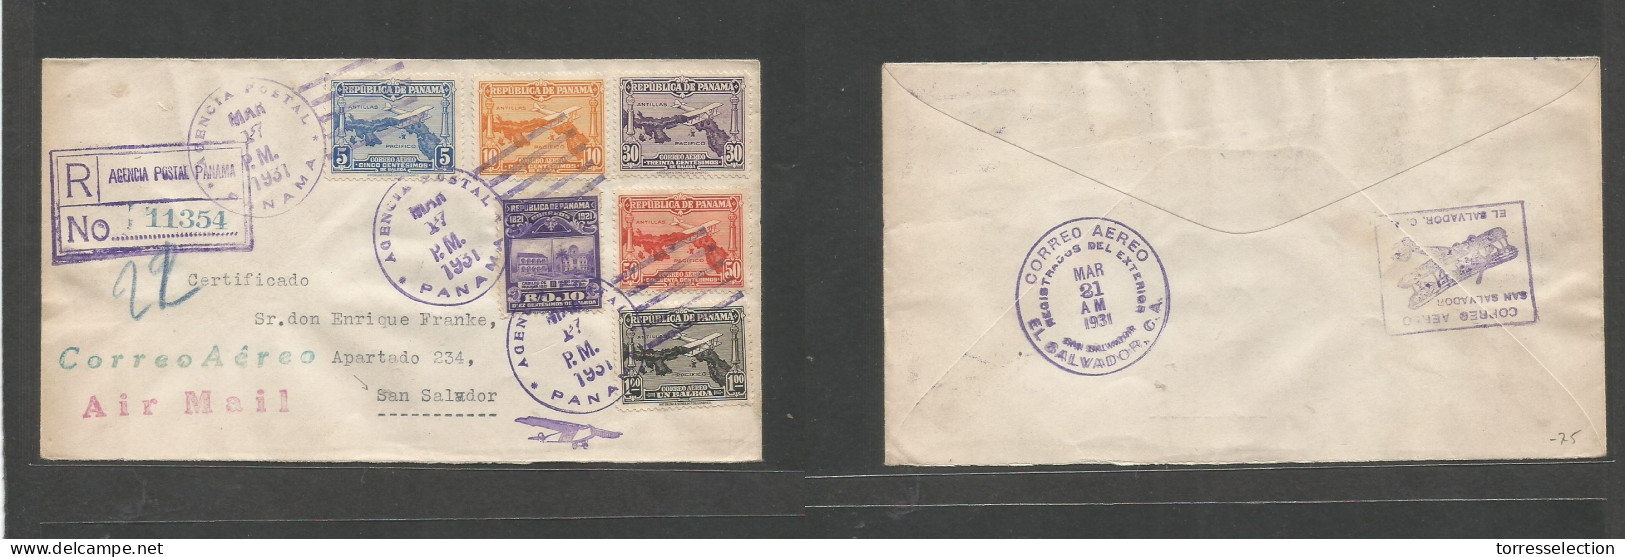 PANAMA. 1931 (17 March) GPO - Salvador (21 March) Registered Multifkd Env At 2,05b Rate, Tied Lilac Grills Cds. Better A - Panamá